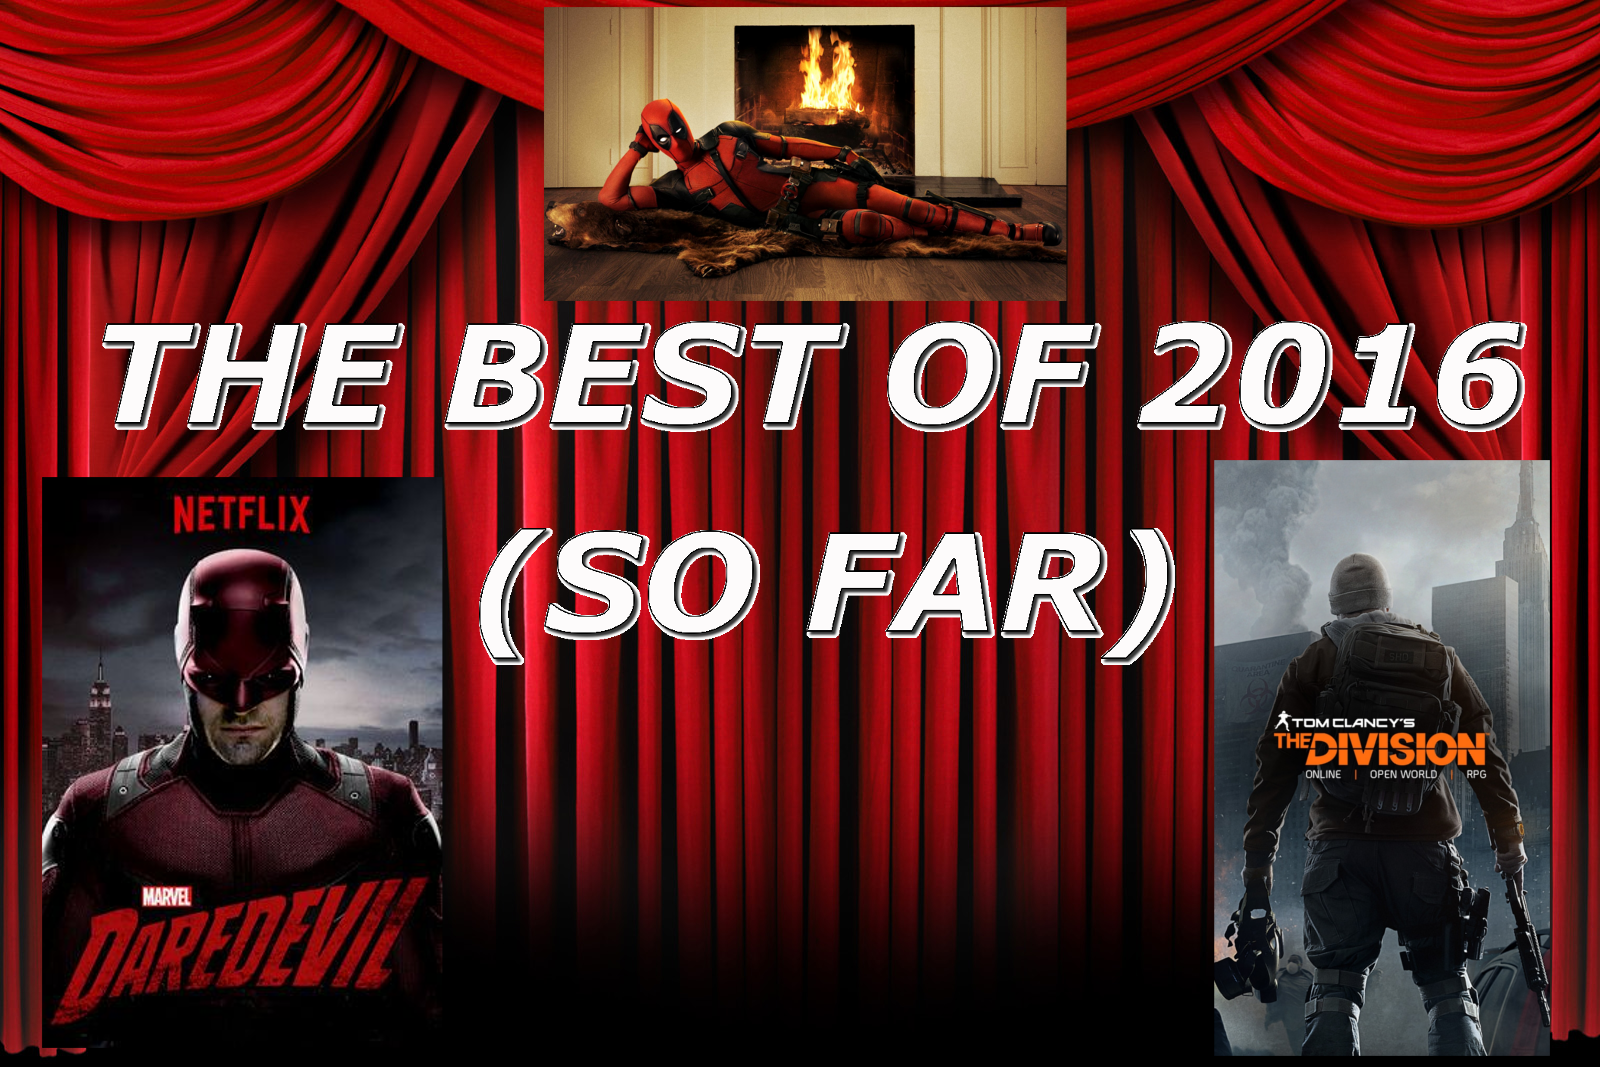 The Best Of 2016 (so Far)